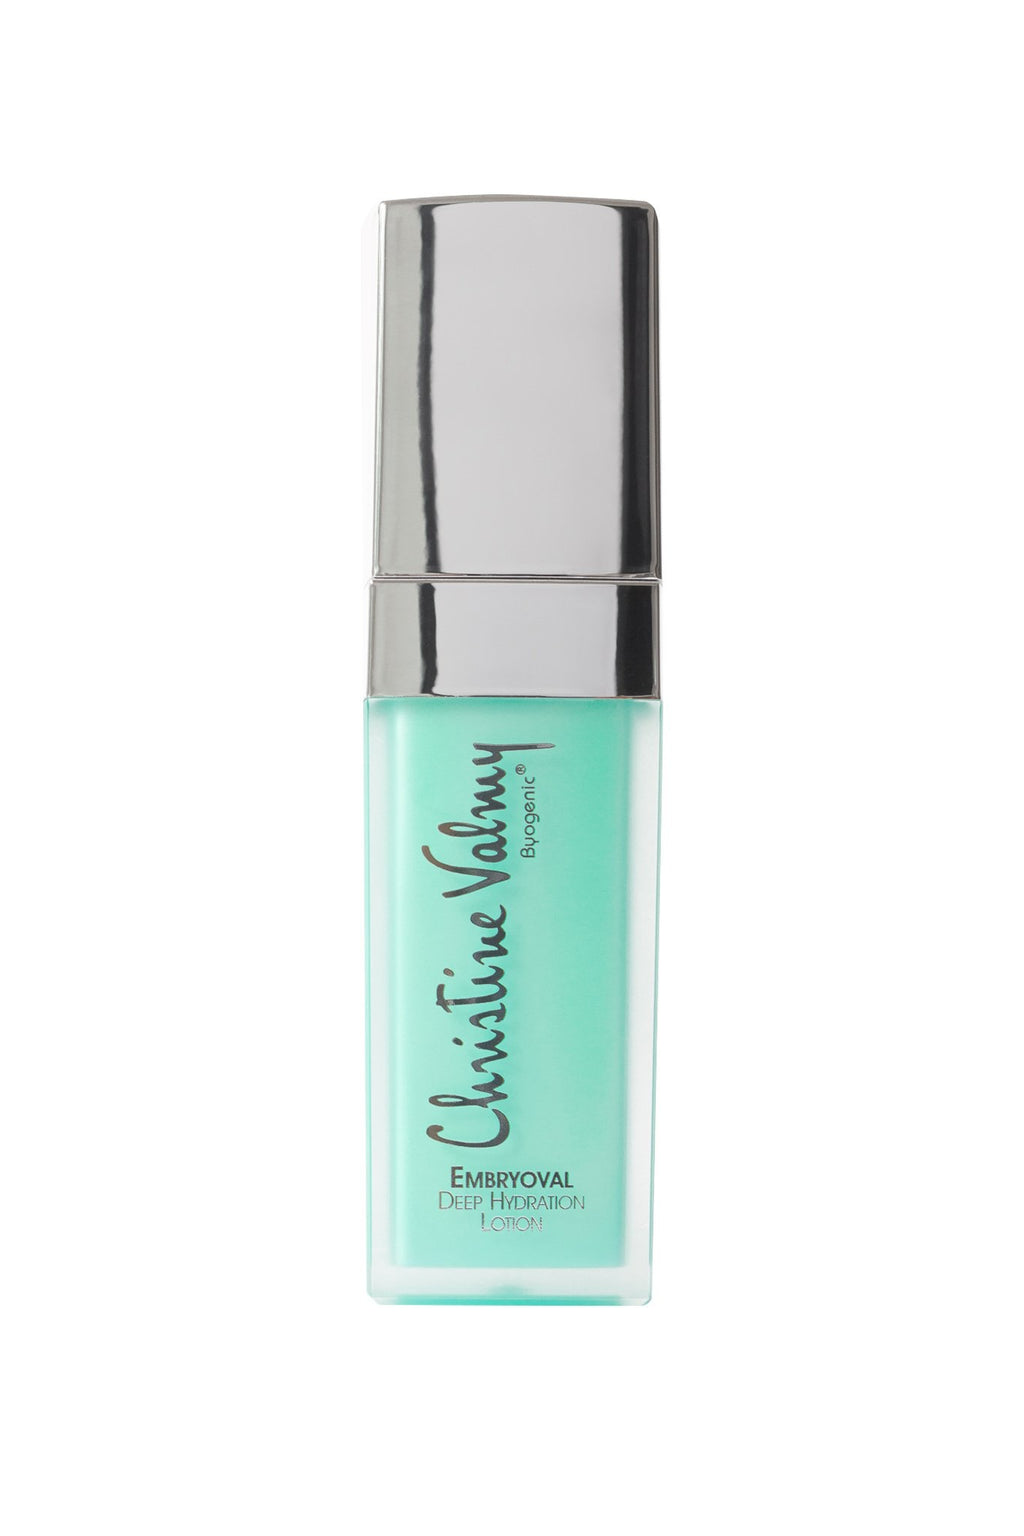 Christine Valmy Embroval hydrating lotion, for dry skin.